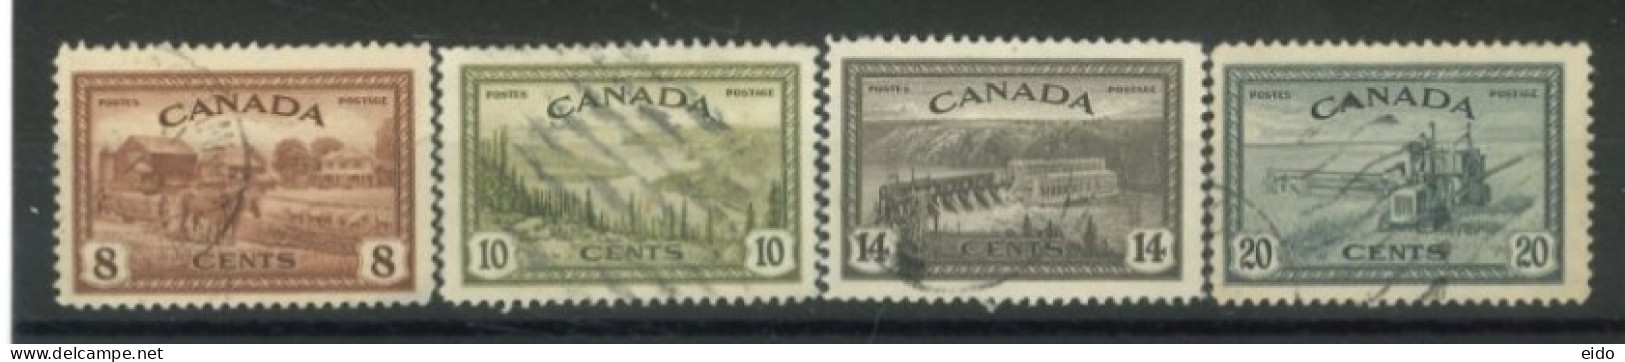 CANADA - 1946, RE CONVERTION TO PEACE STAMPS SET OF 4, USED. - Gebruikt